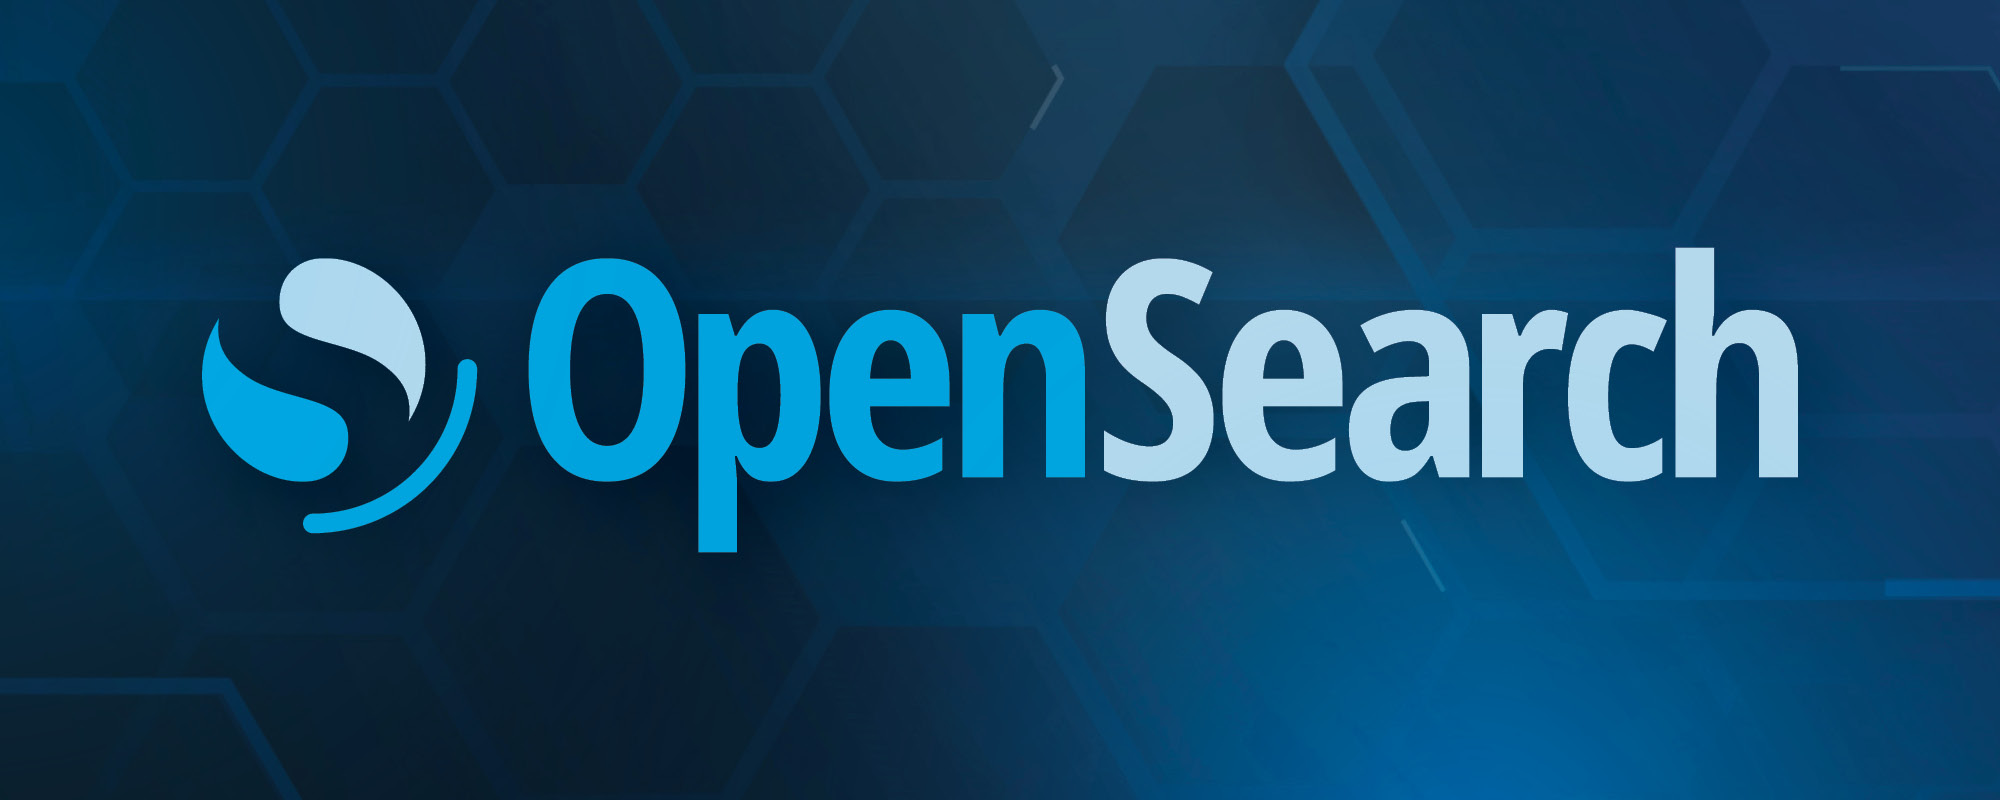 OpenSearch logo and name on top of a dark blue background with a slight honeycomb pattern